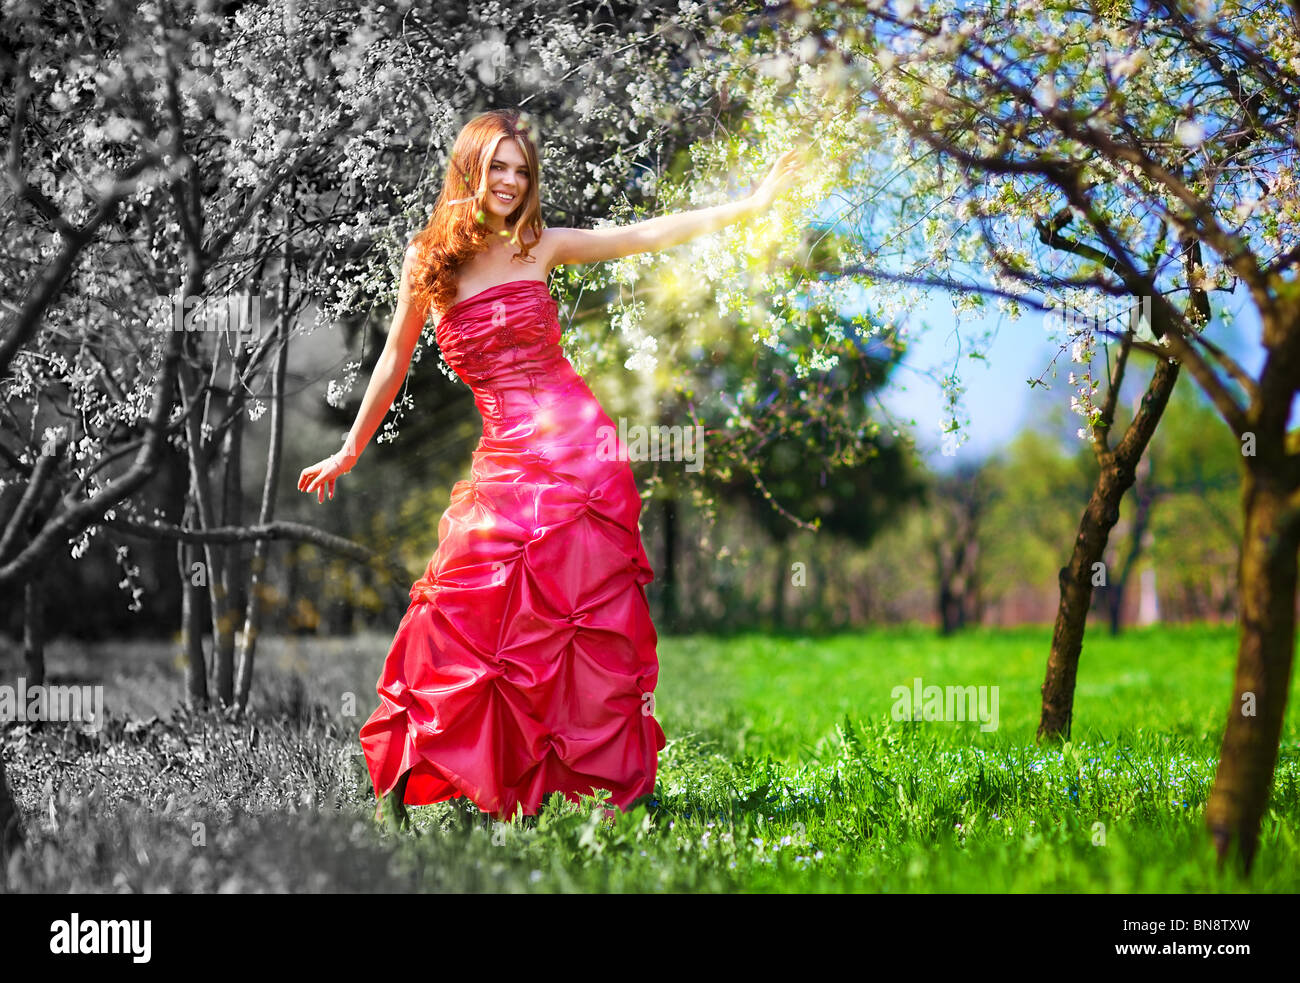 Young fairy woman in red dress painting garden. Stock Photo